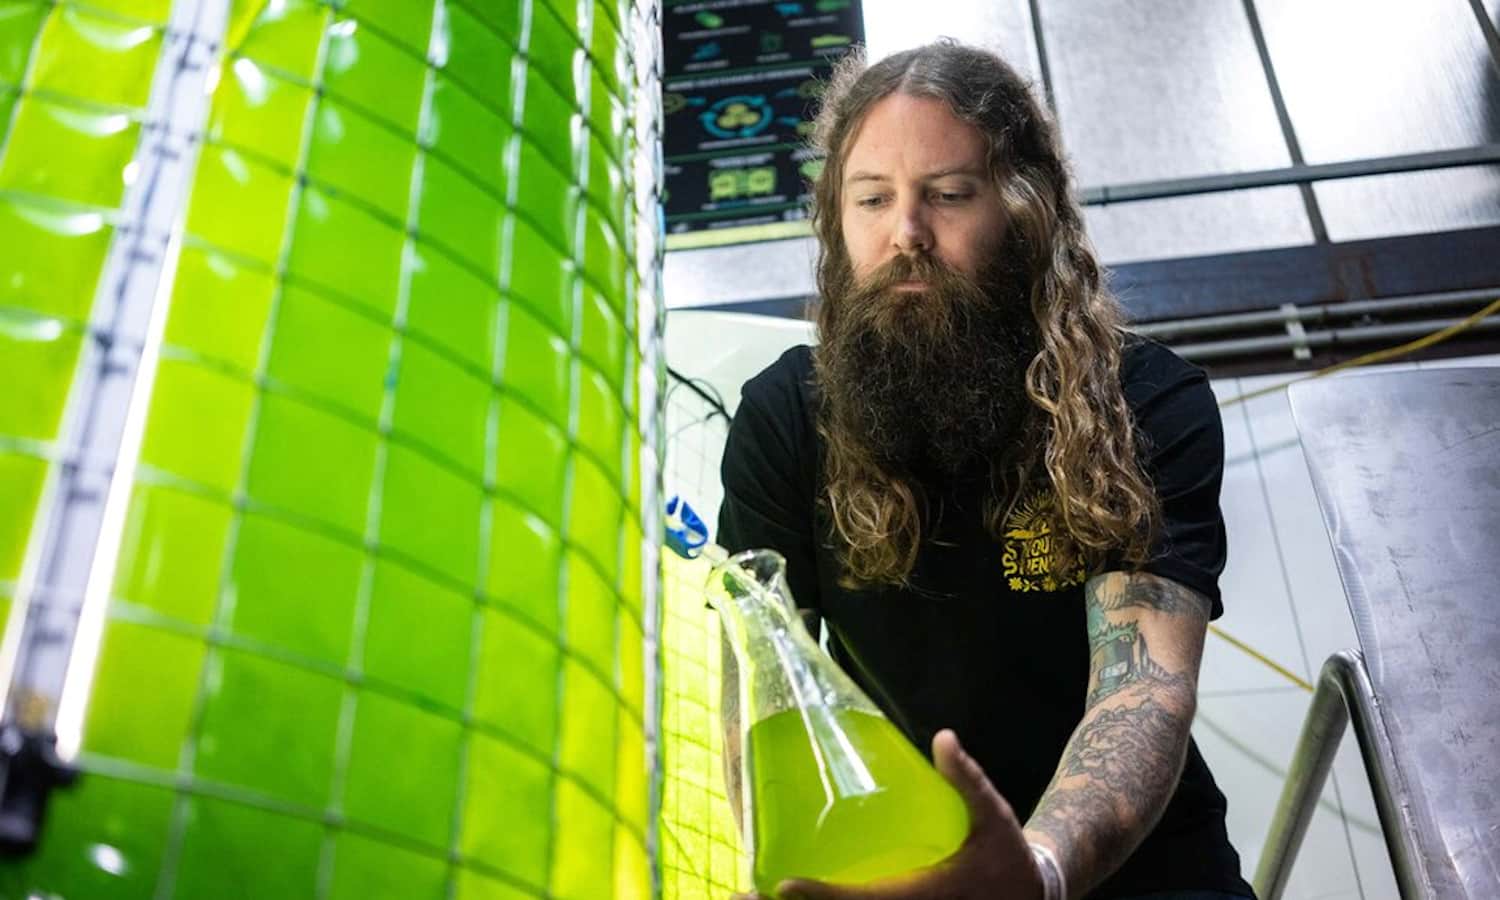 Algae is reducing an Australian brewery's beer production emissions.